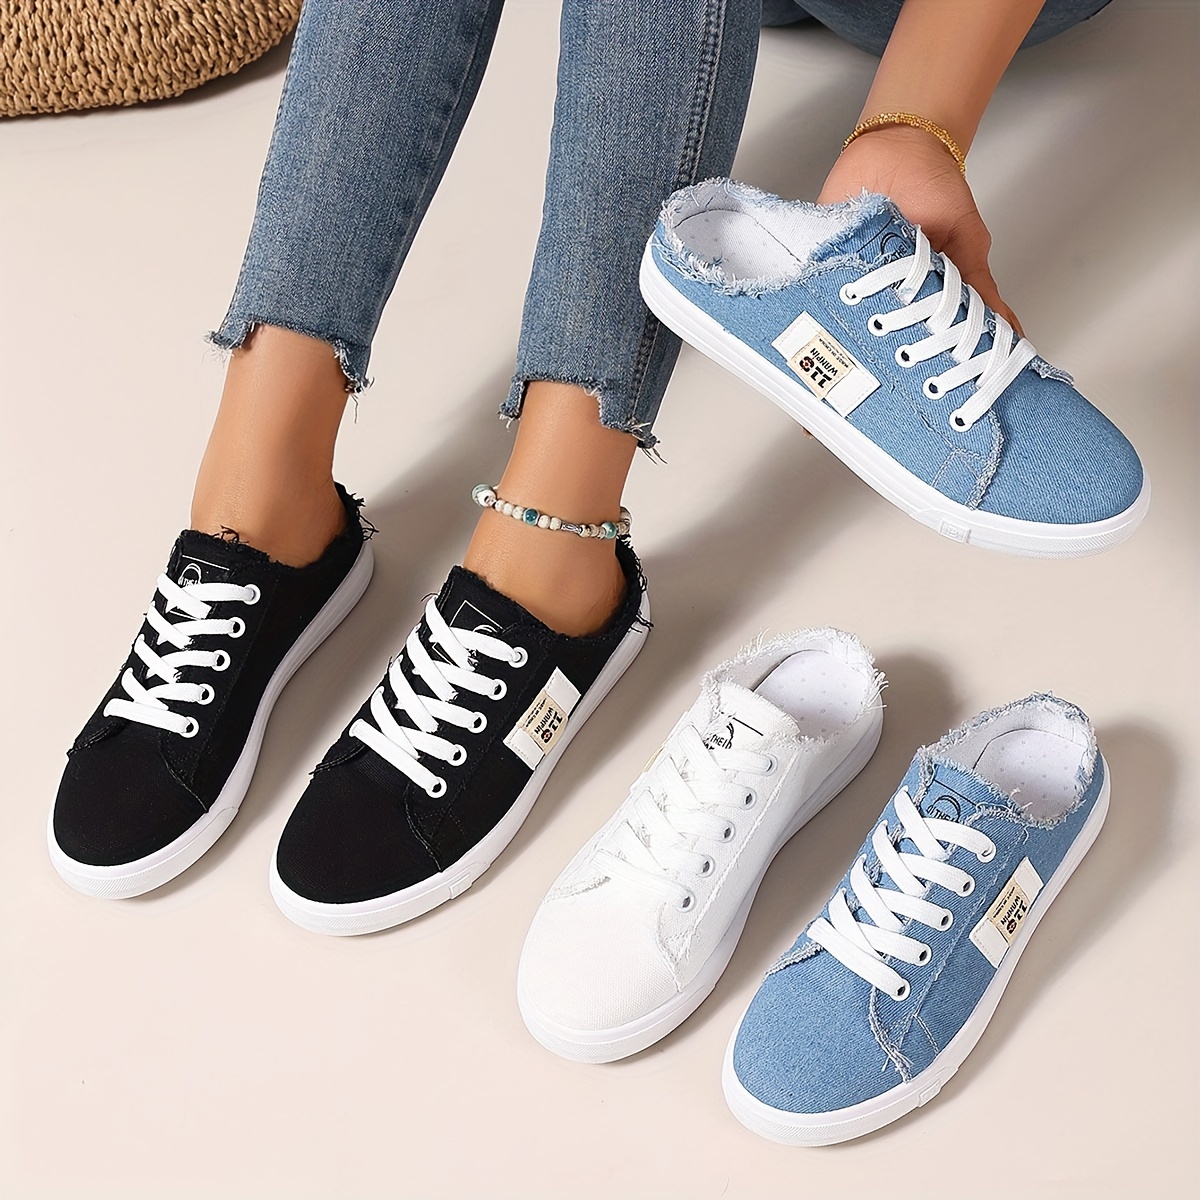 

Women's Canvas Mule Sneakers, Casual Lace Up Low Top Flat Skate Hsoes, All-match Student Walking Shoes